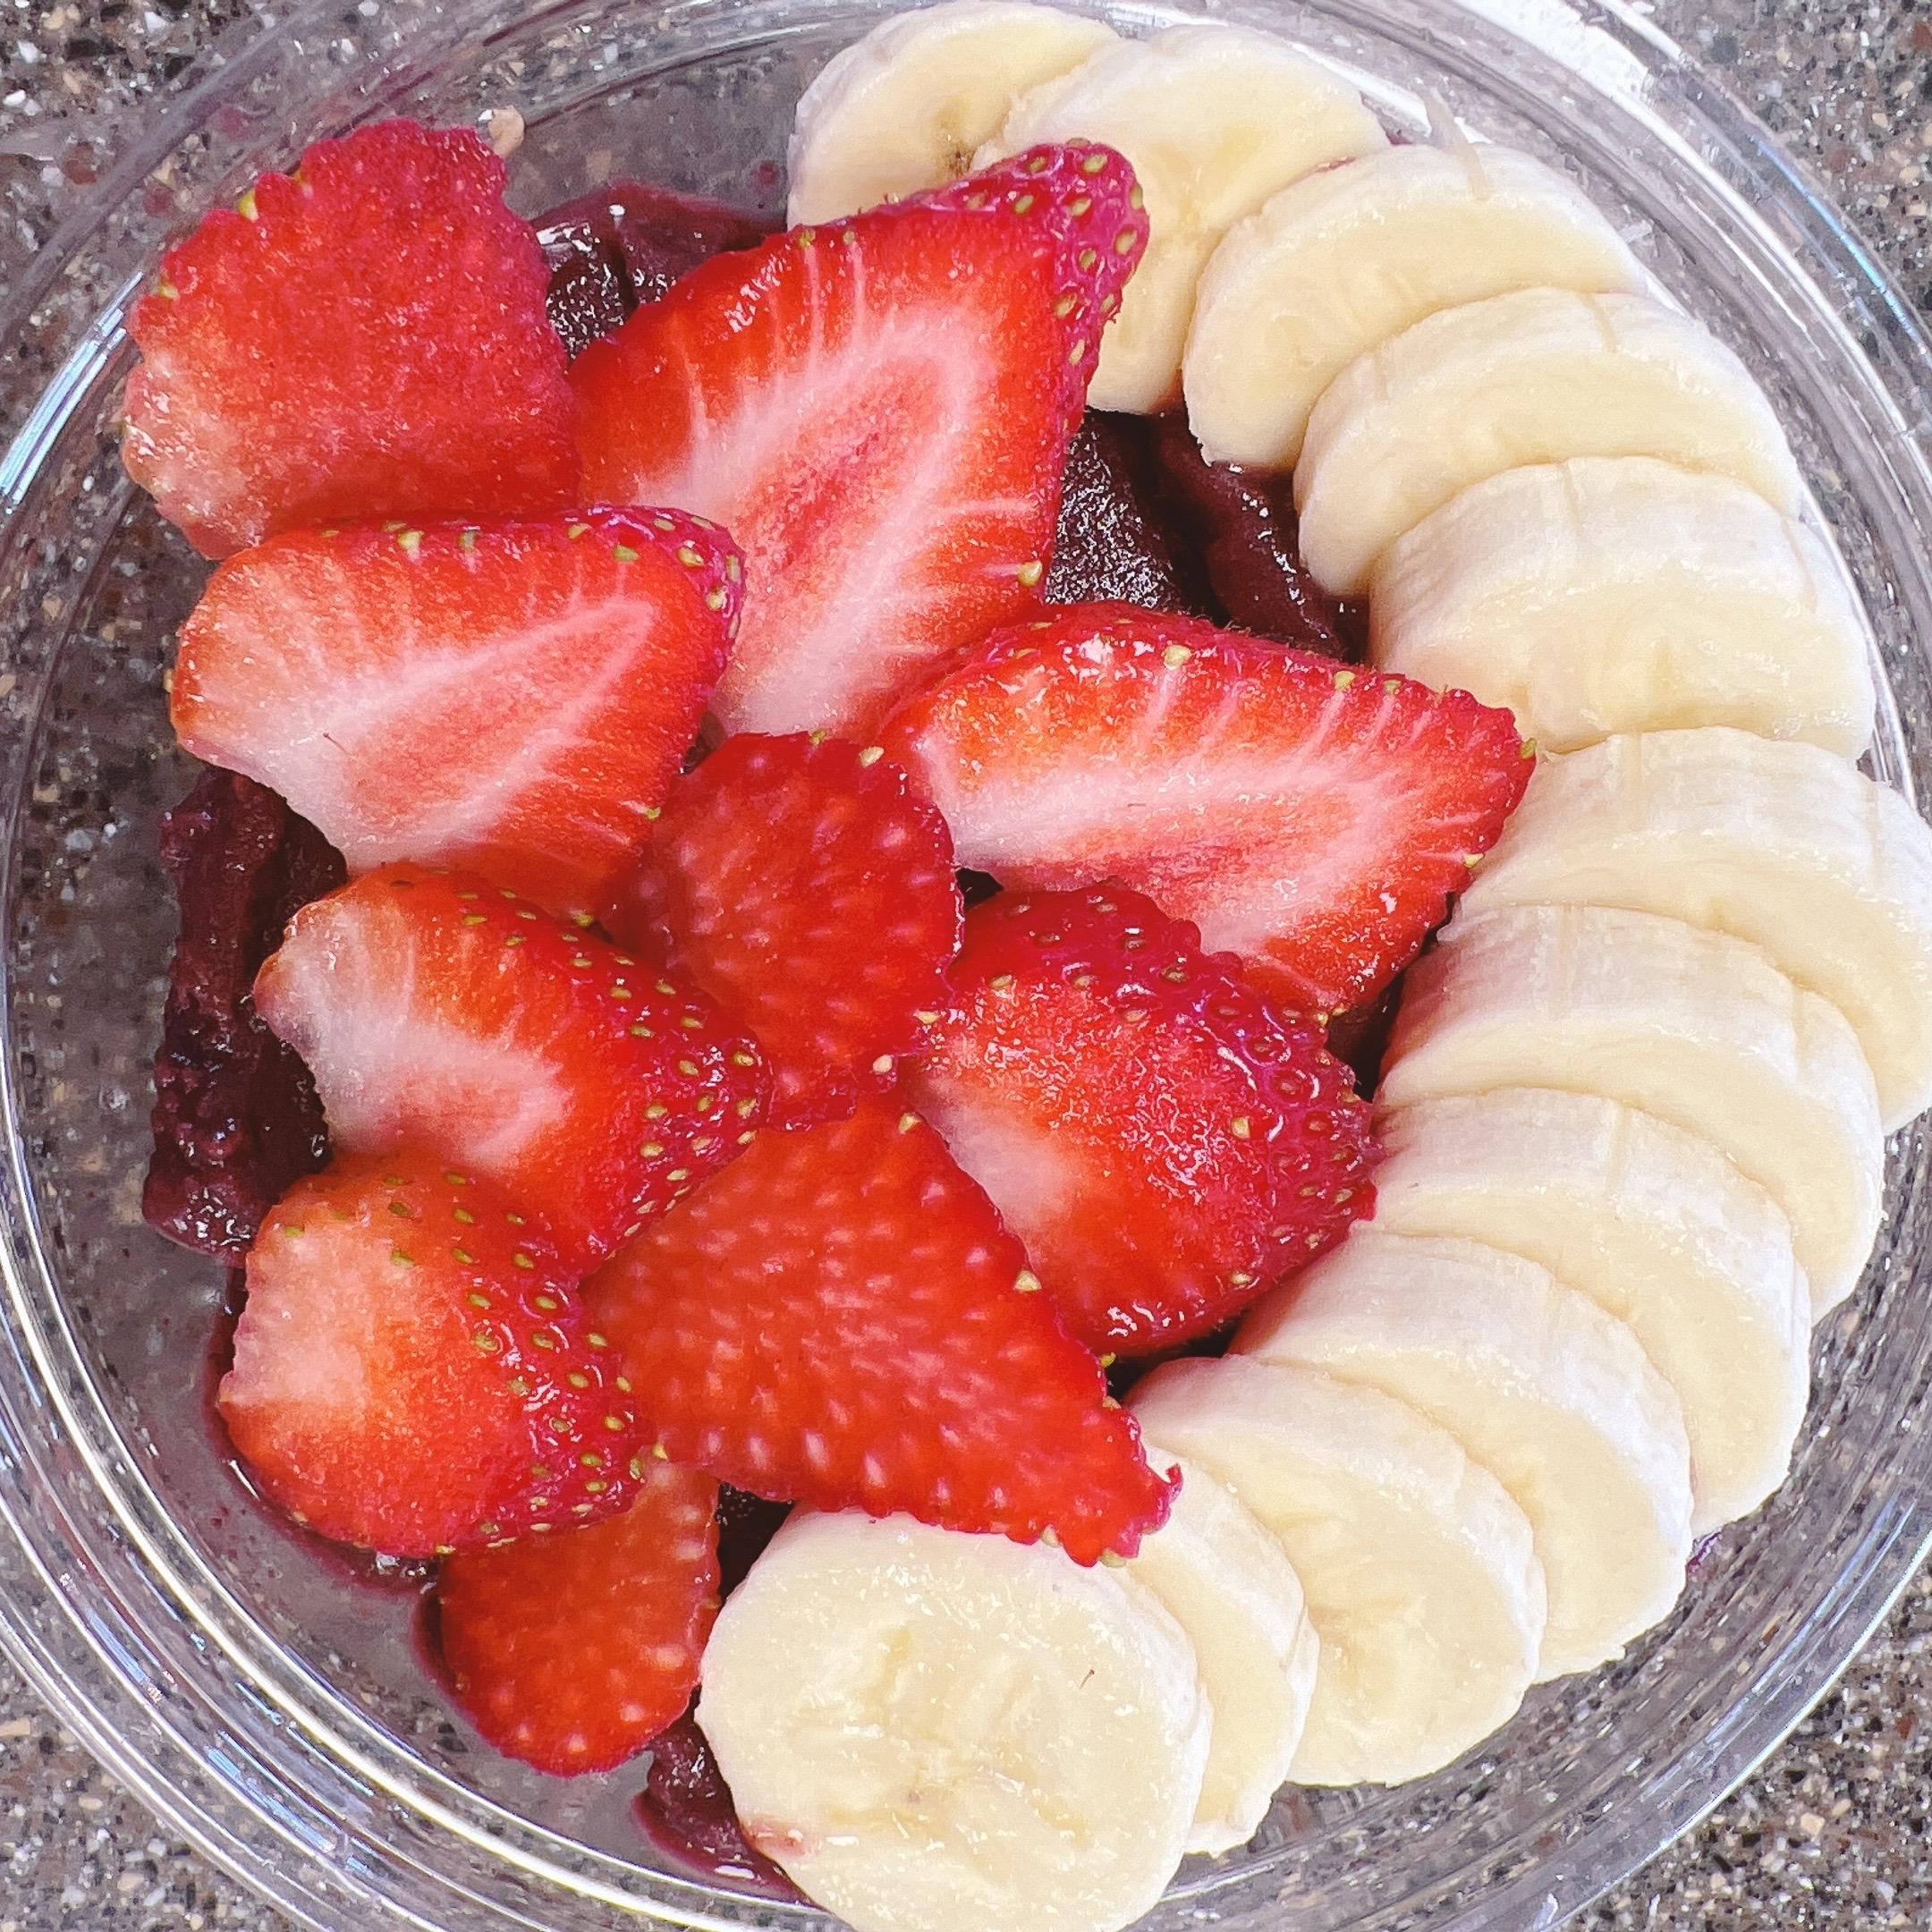 Kids Build Your Acai (up to 4 toppings)